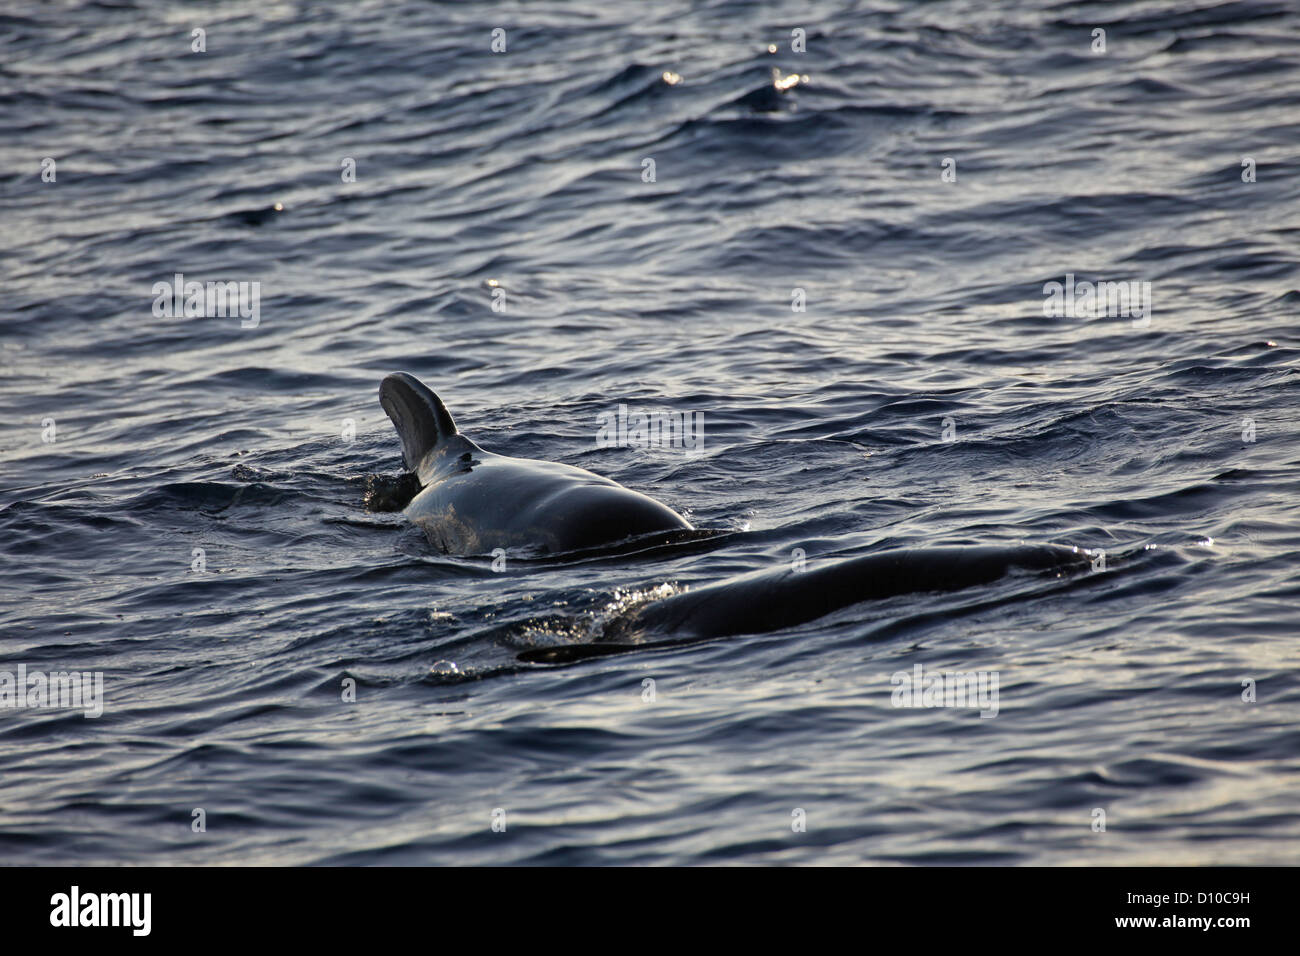 Two short-finned pilot whales play at the water surface, La Gomera, Canary Islands Stock Photo